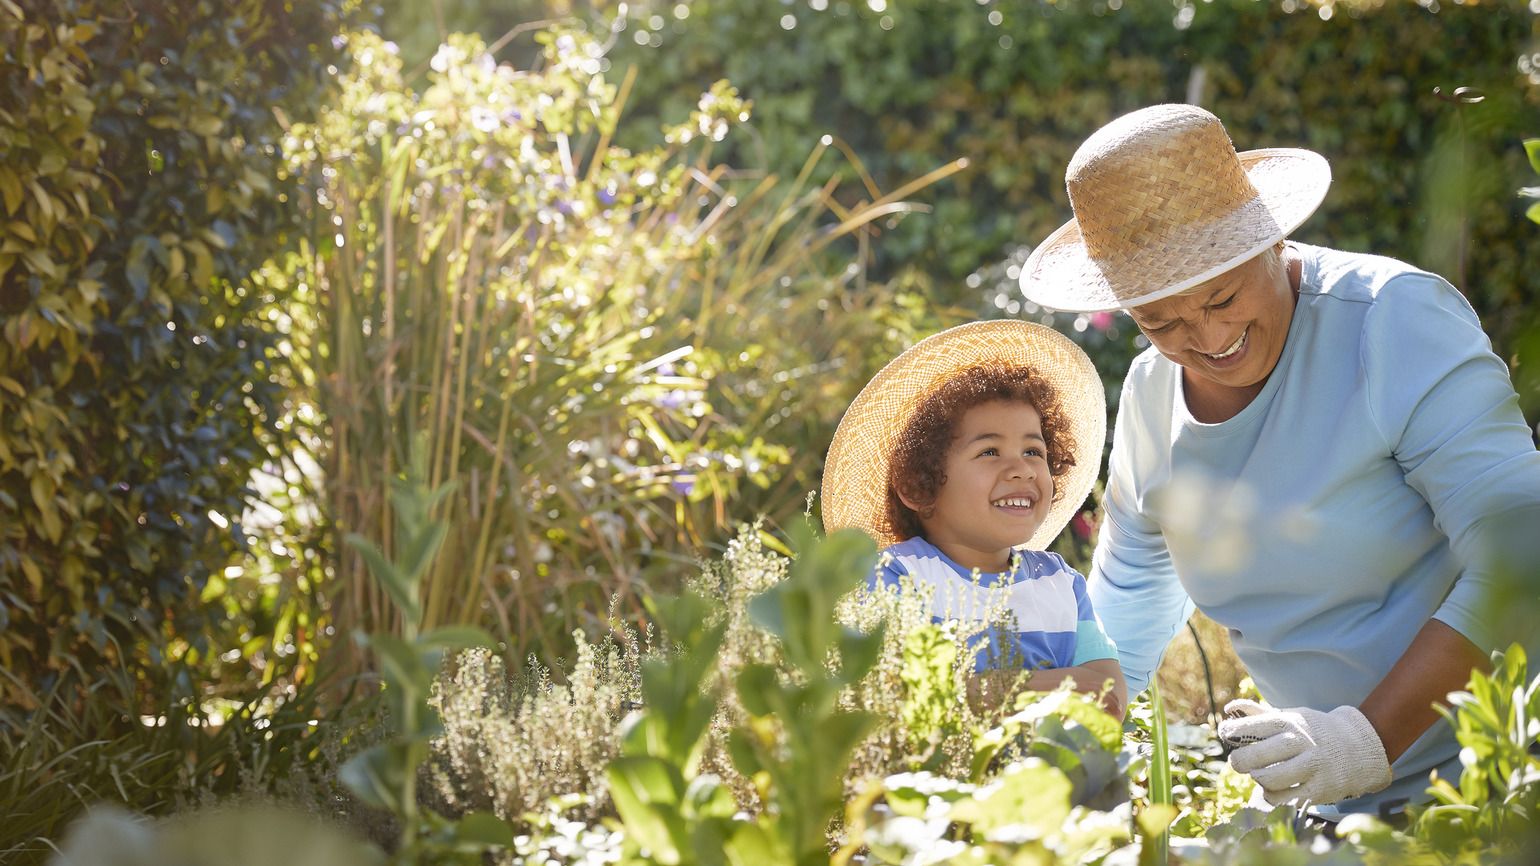 Grandmother and child gardening outdoors (Getty Images)